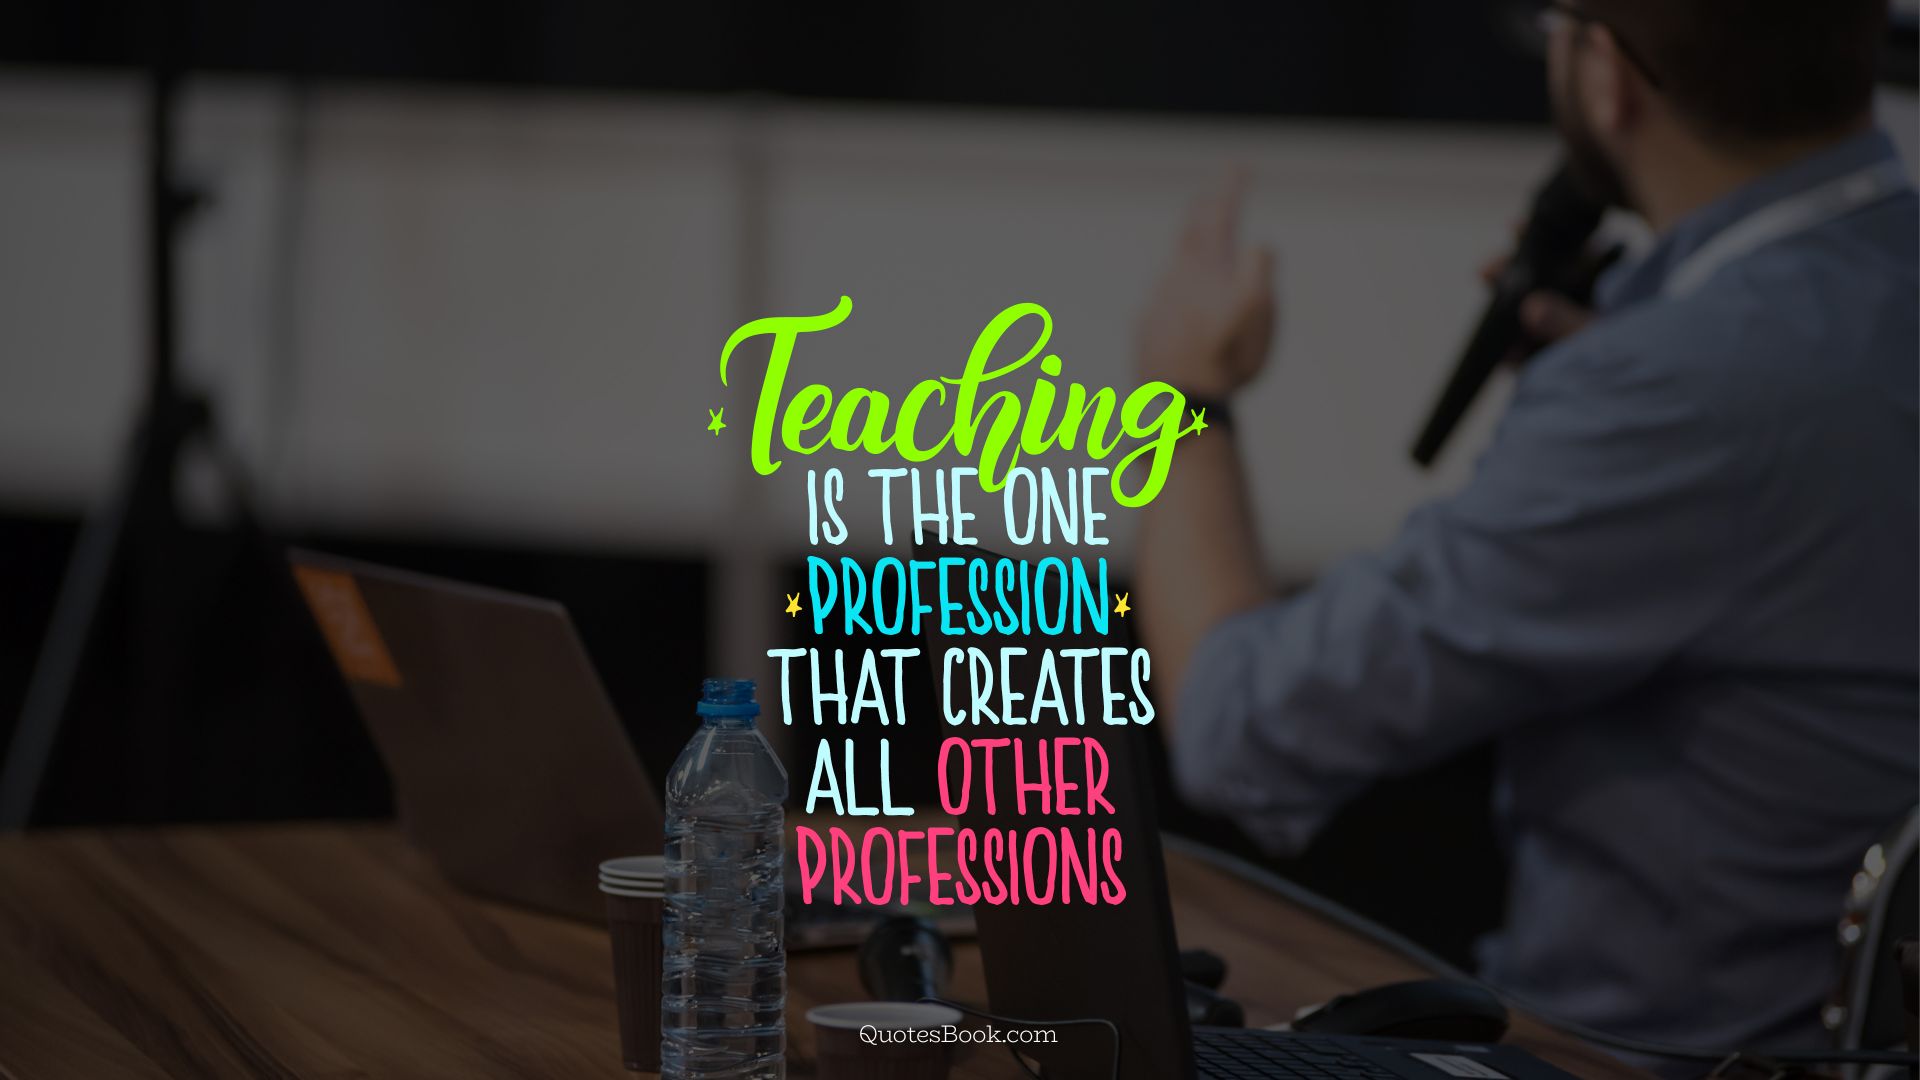 Teaching is the one profession that creates all other professions 